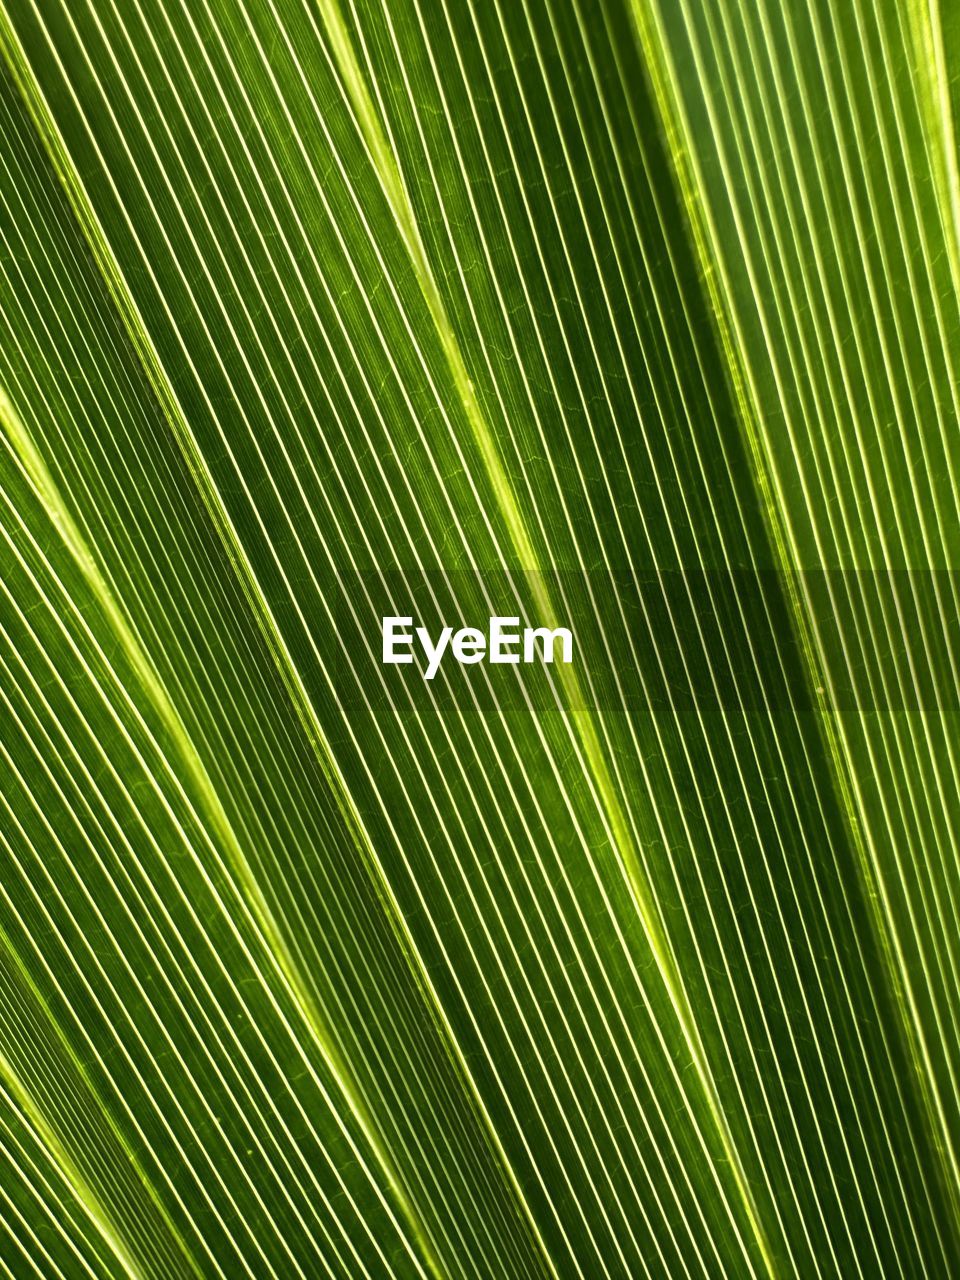 green, backgrounds, leaf, palm tree, full frame, palm leaf, pattern, plant part, no people, yellow, nature, tropical climate, grass, beauty in nature, close-up, plant, banana leaf, line, growth, sunlight, textured, tree, frond, freshness, flower, circle, striped, outdoors, abstract